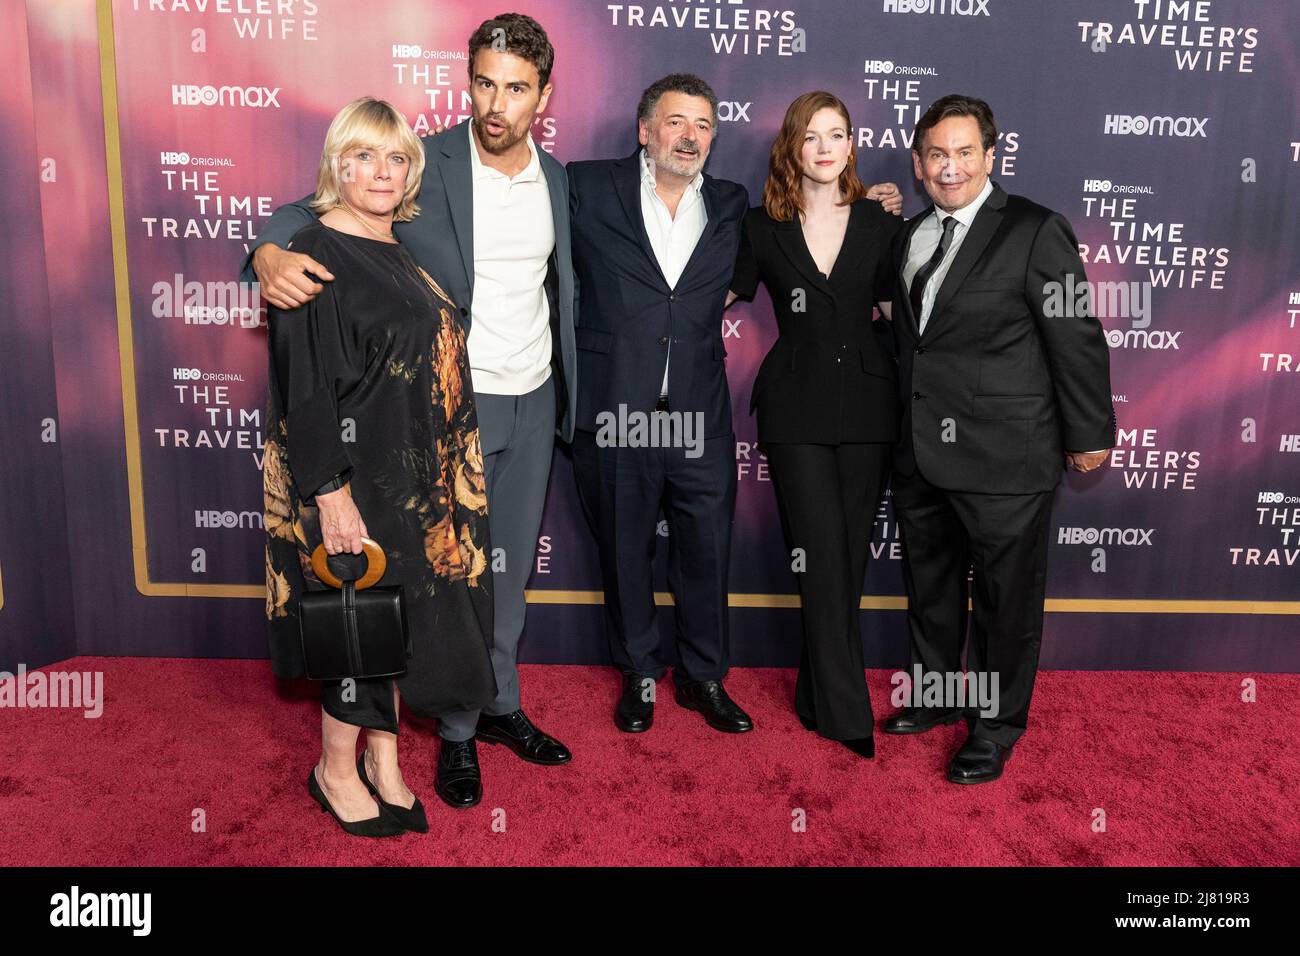 New York, NY - May 11, 2022: Sue Vertue, Theo James, Steven Moffat, Rose Leslie, David Nutter attend HBO's The Time Traveler's Wife premiere at Morgan Library Stock Photo